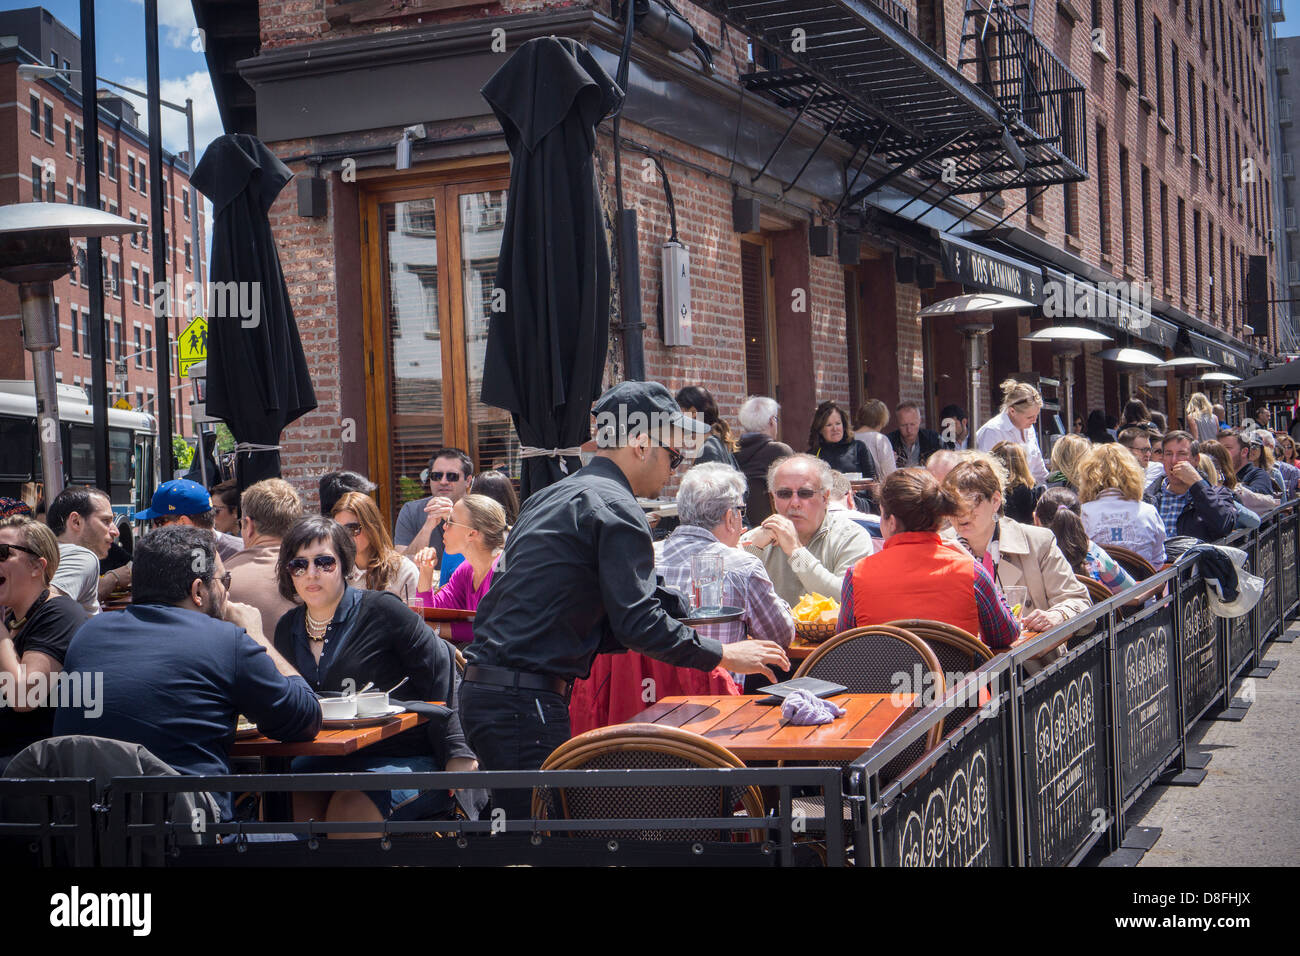 Busy al fresco dining at sidewalk cafes in the Meatpacking District in New York on Sunday, May 26, 2013. (© Richard B. Levine) Stock Photo